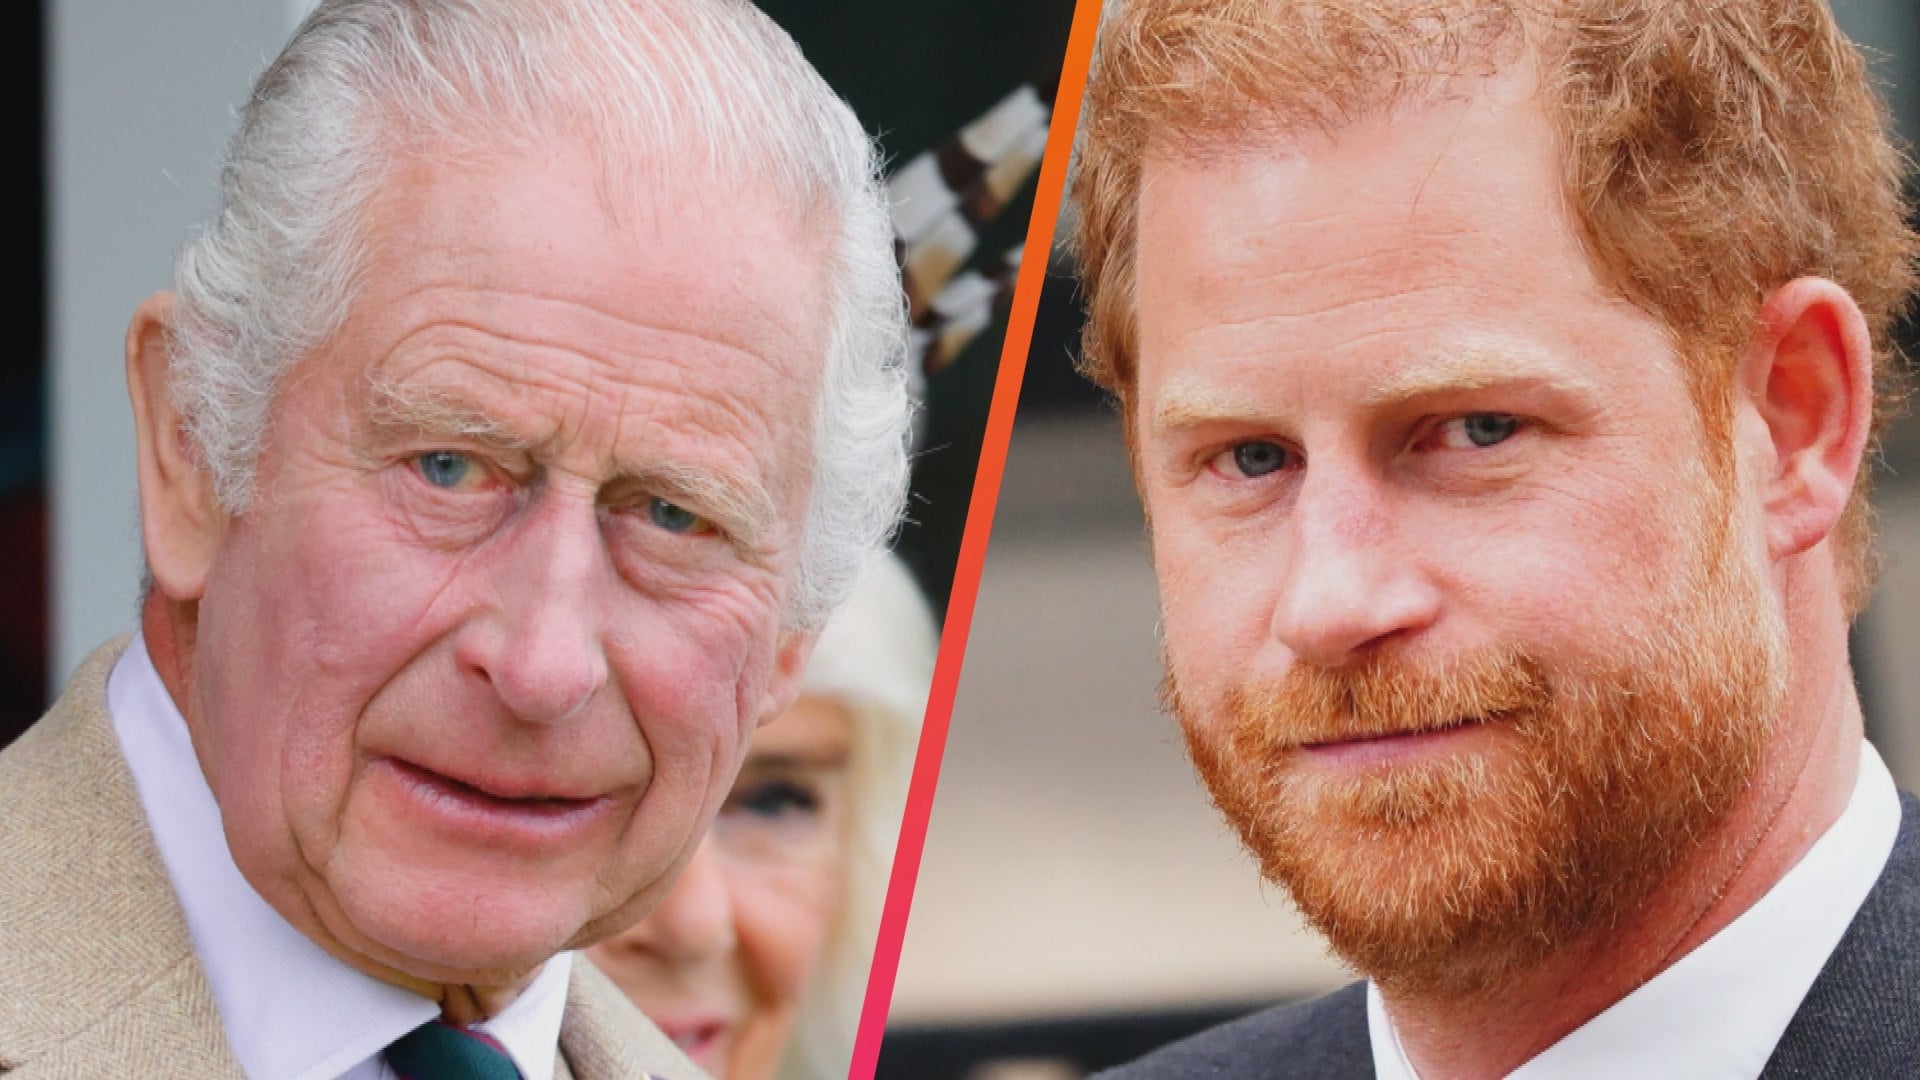 Why King Charles Is Hesitant to Sit Down and Talk With Prince Harry, Royal Expert Explains